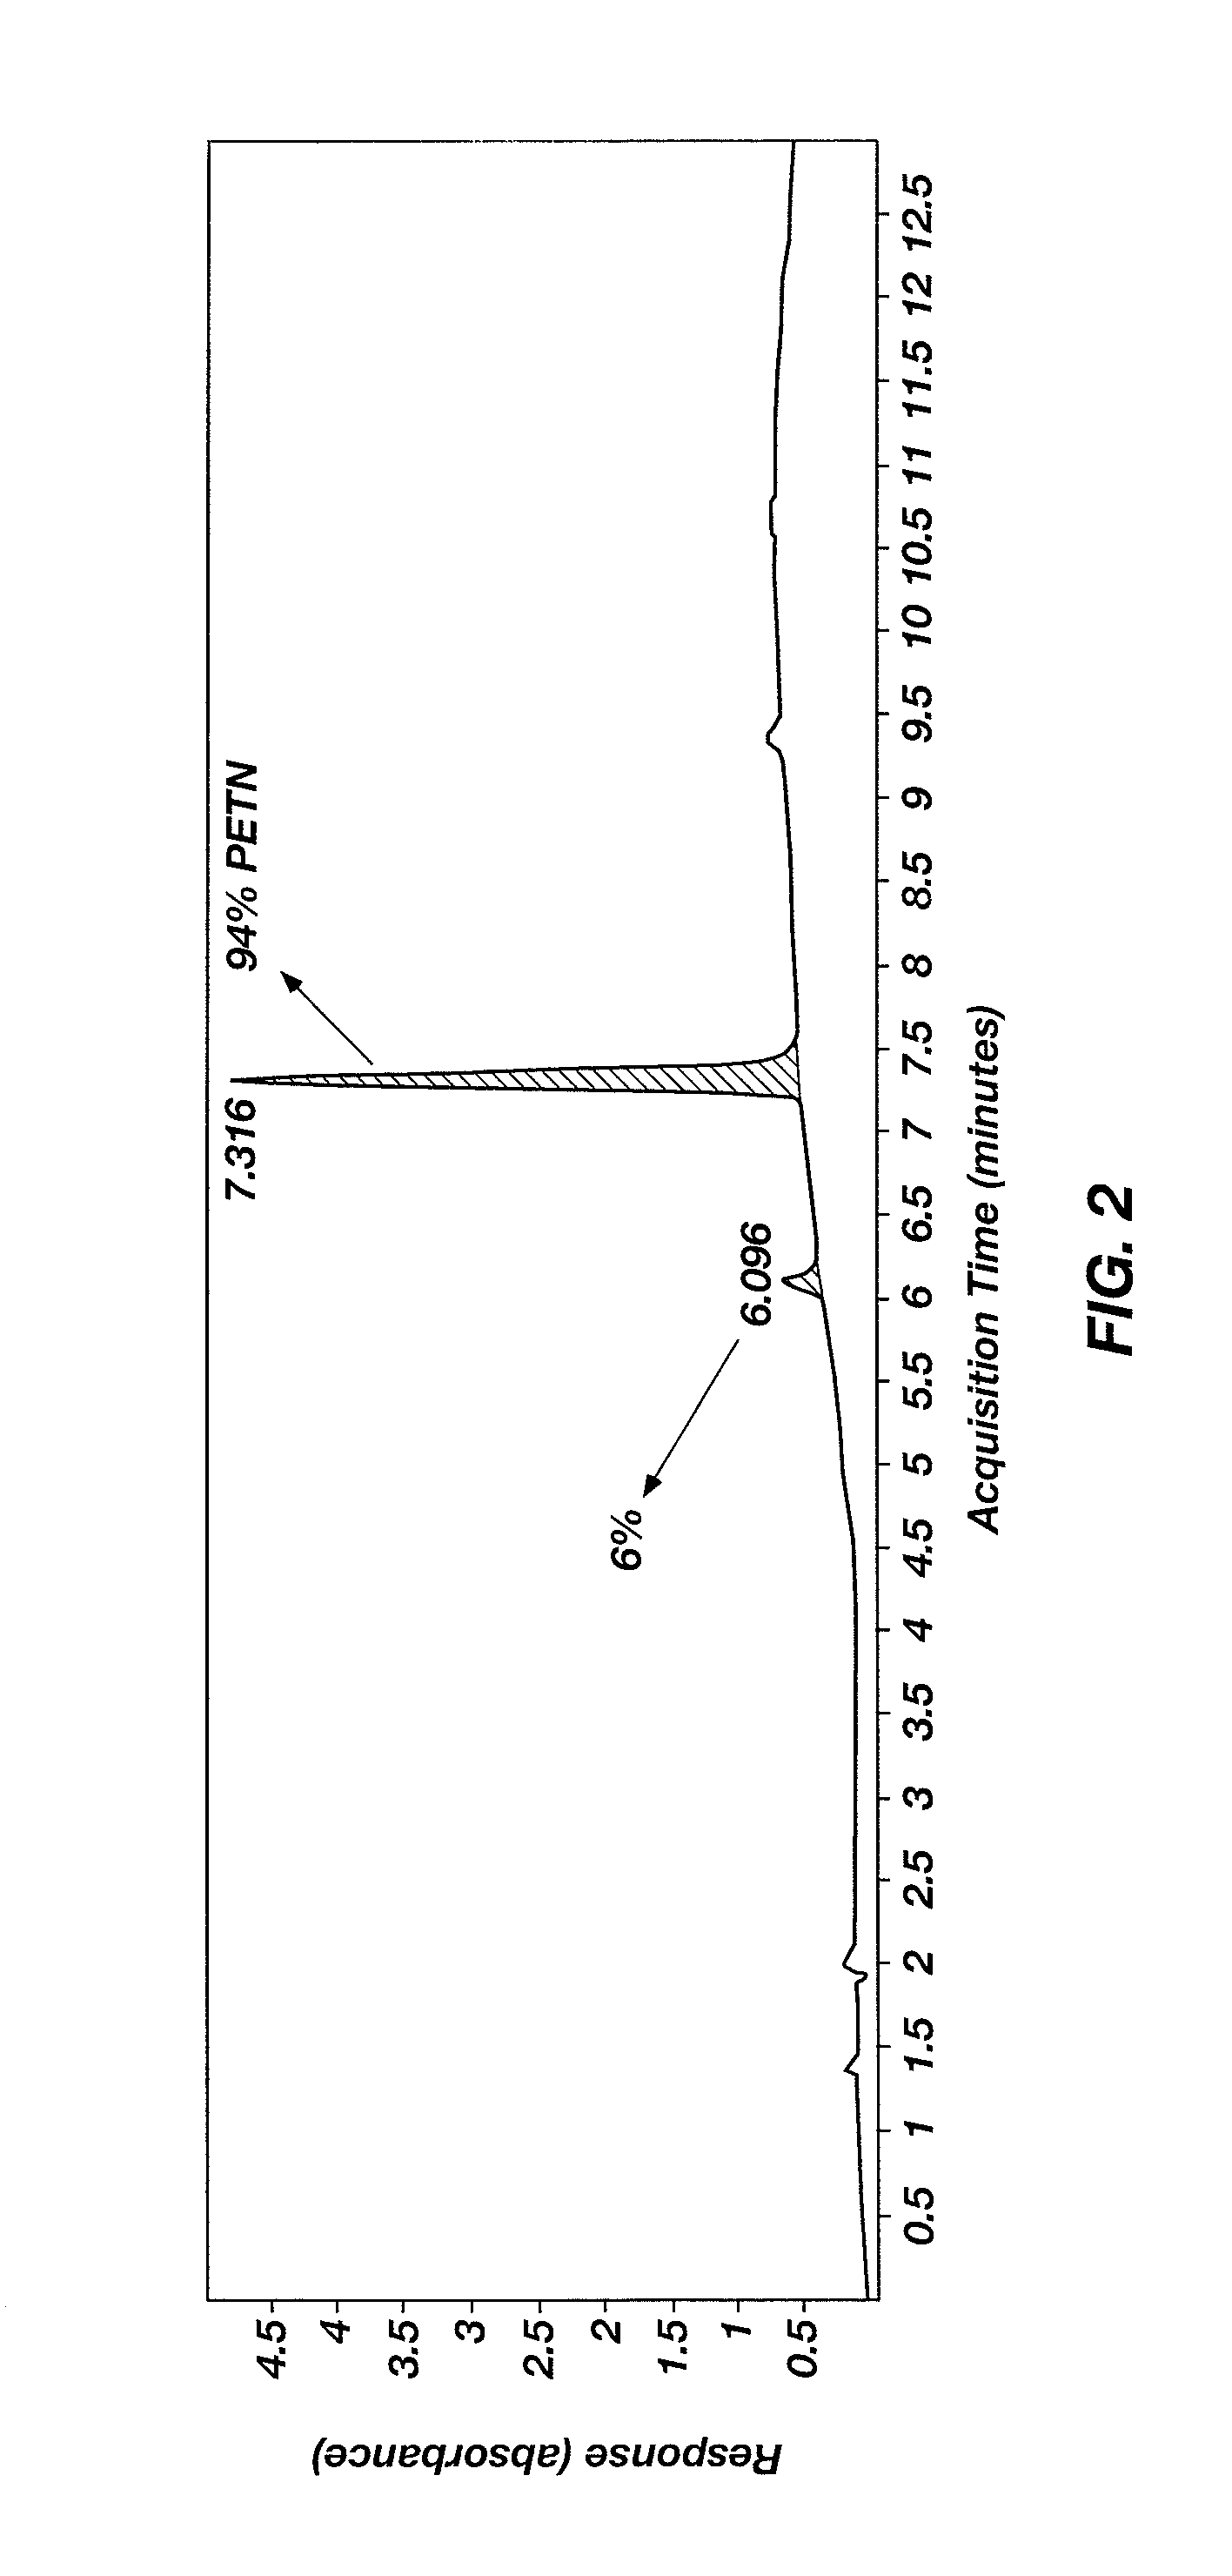 Methods of producing nitrate esters